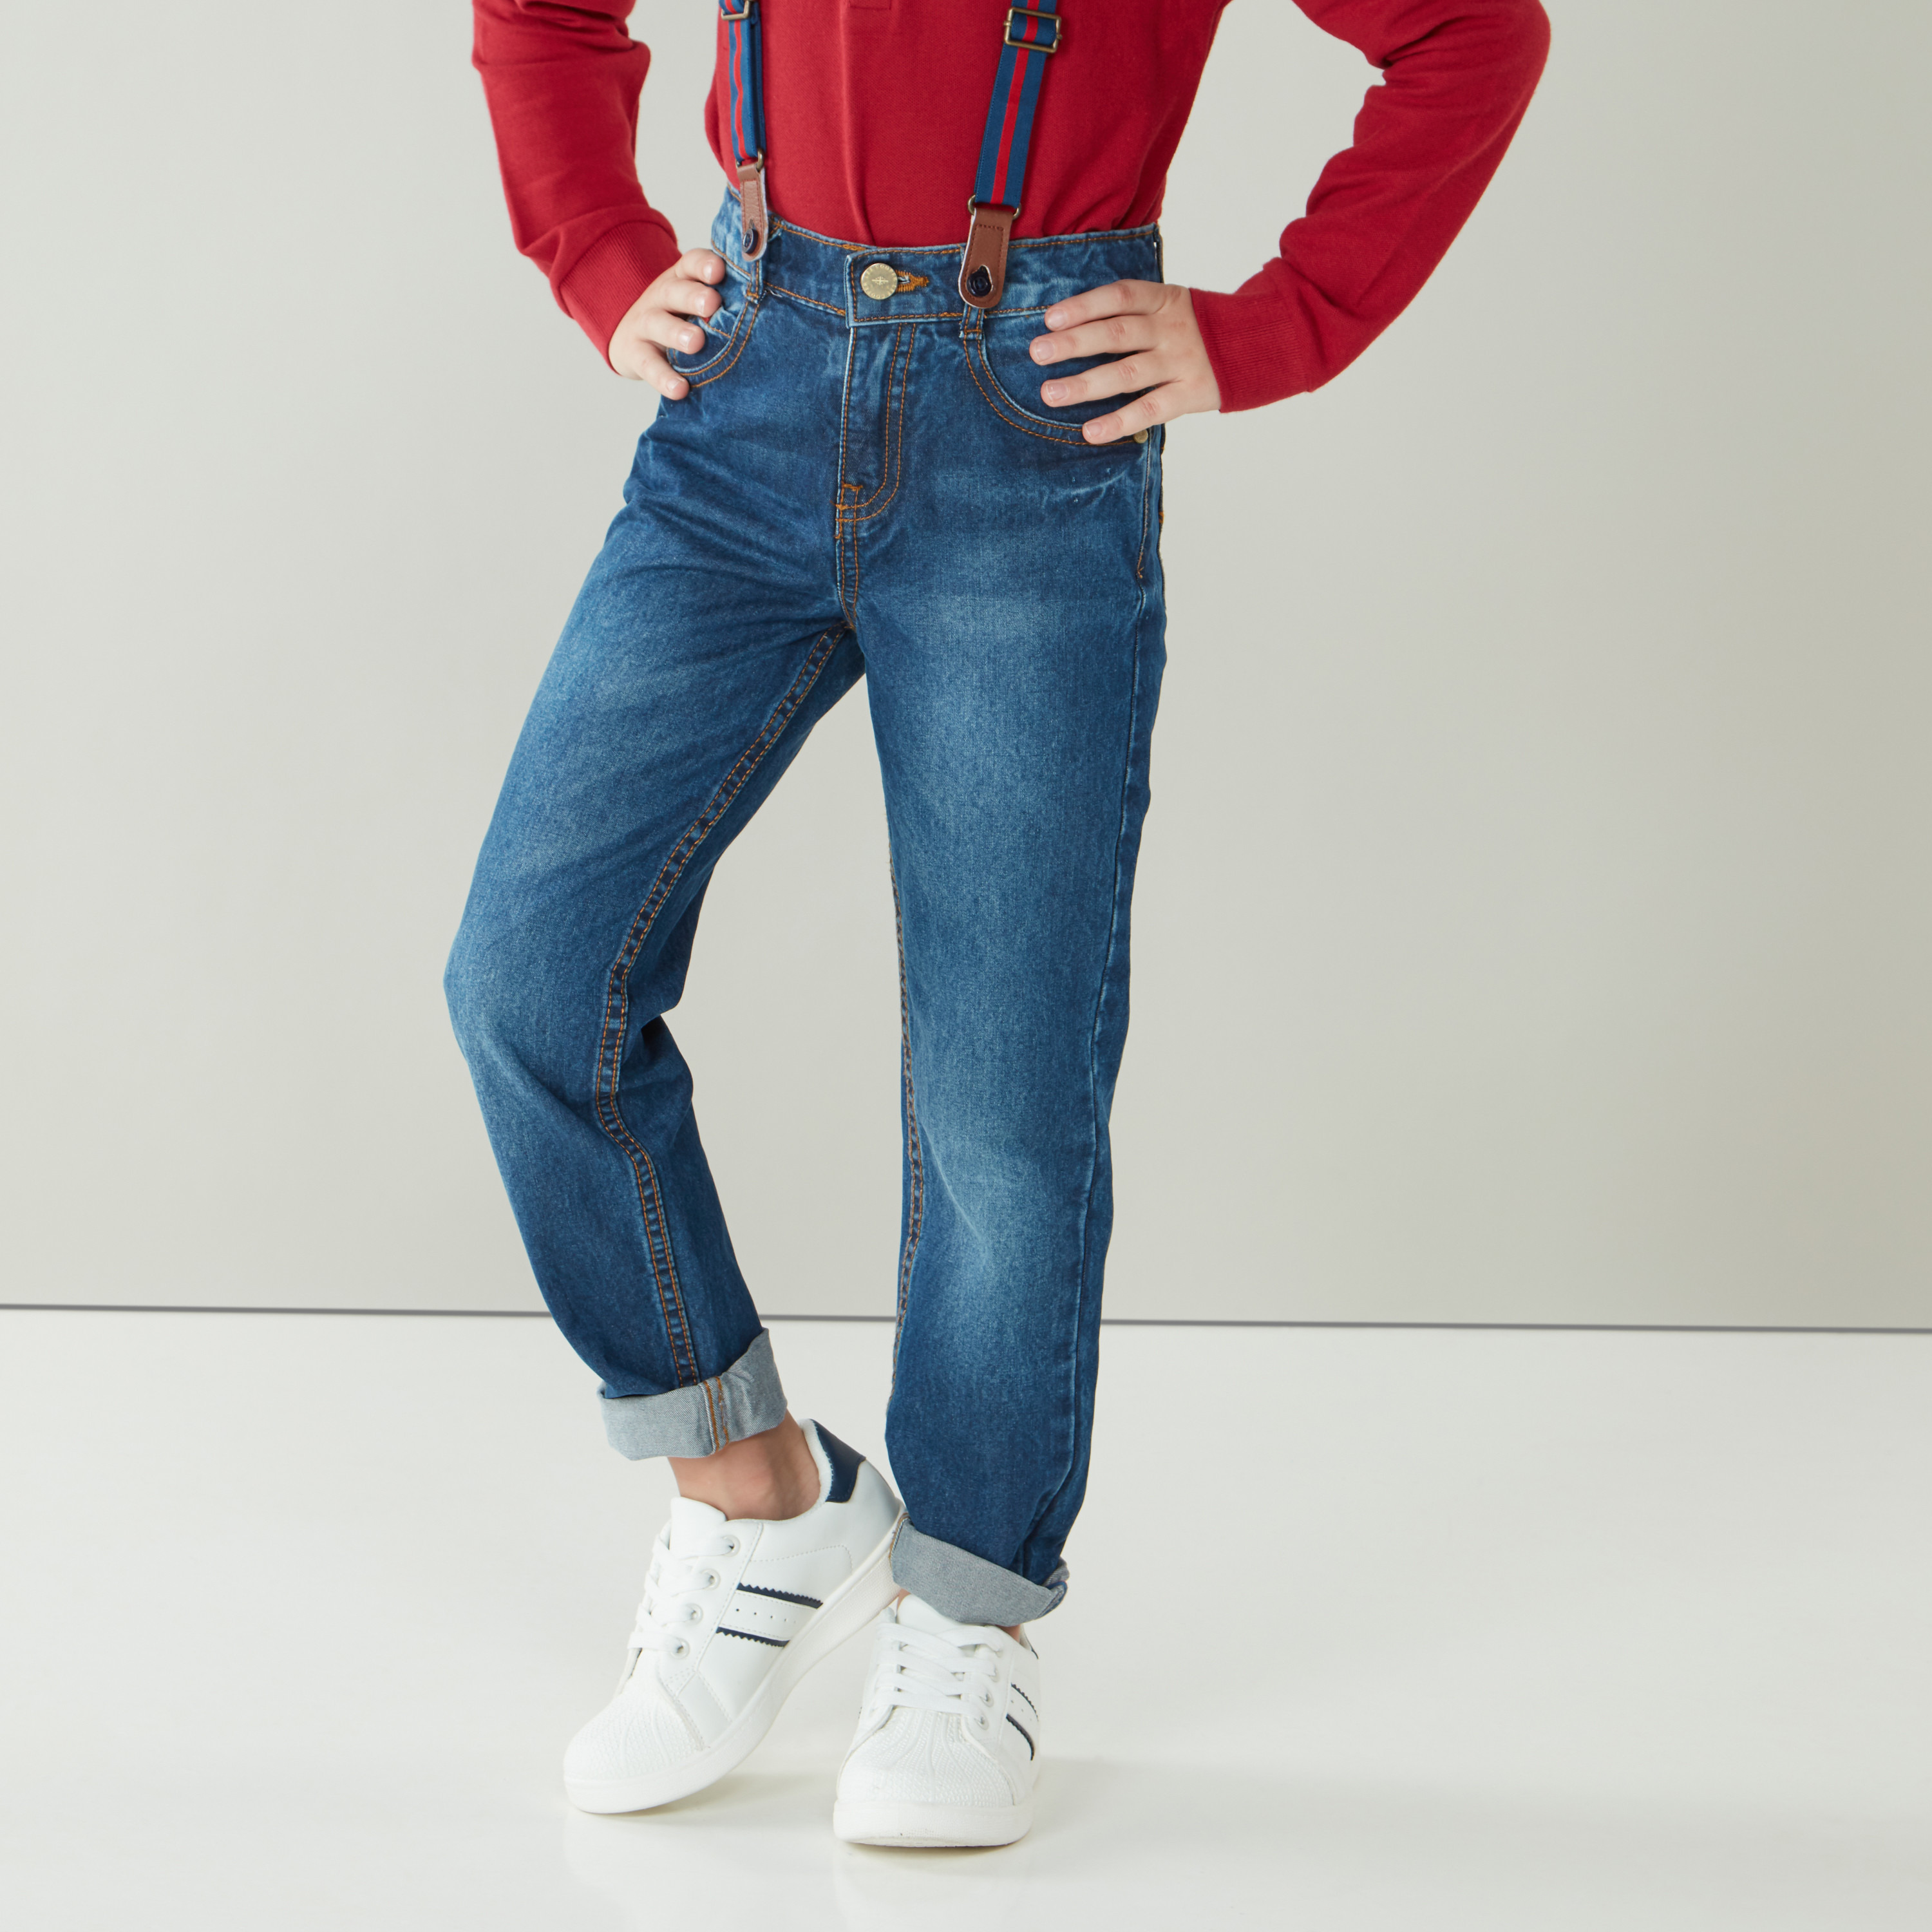 Lee Cooper women's jeans | Discover your perfect jeans online at ZALANDO